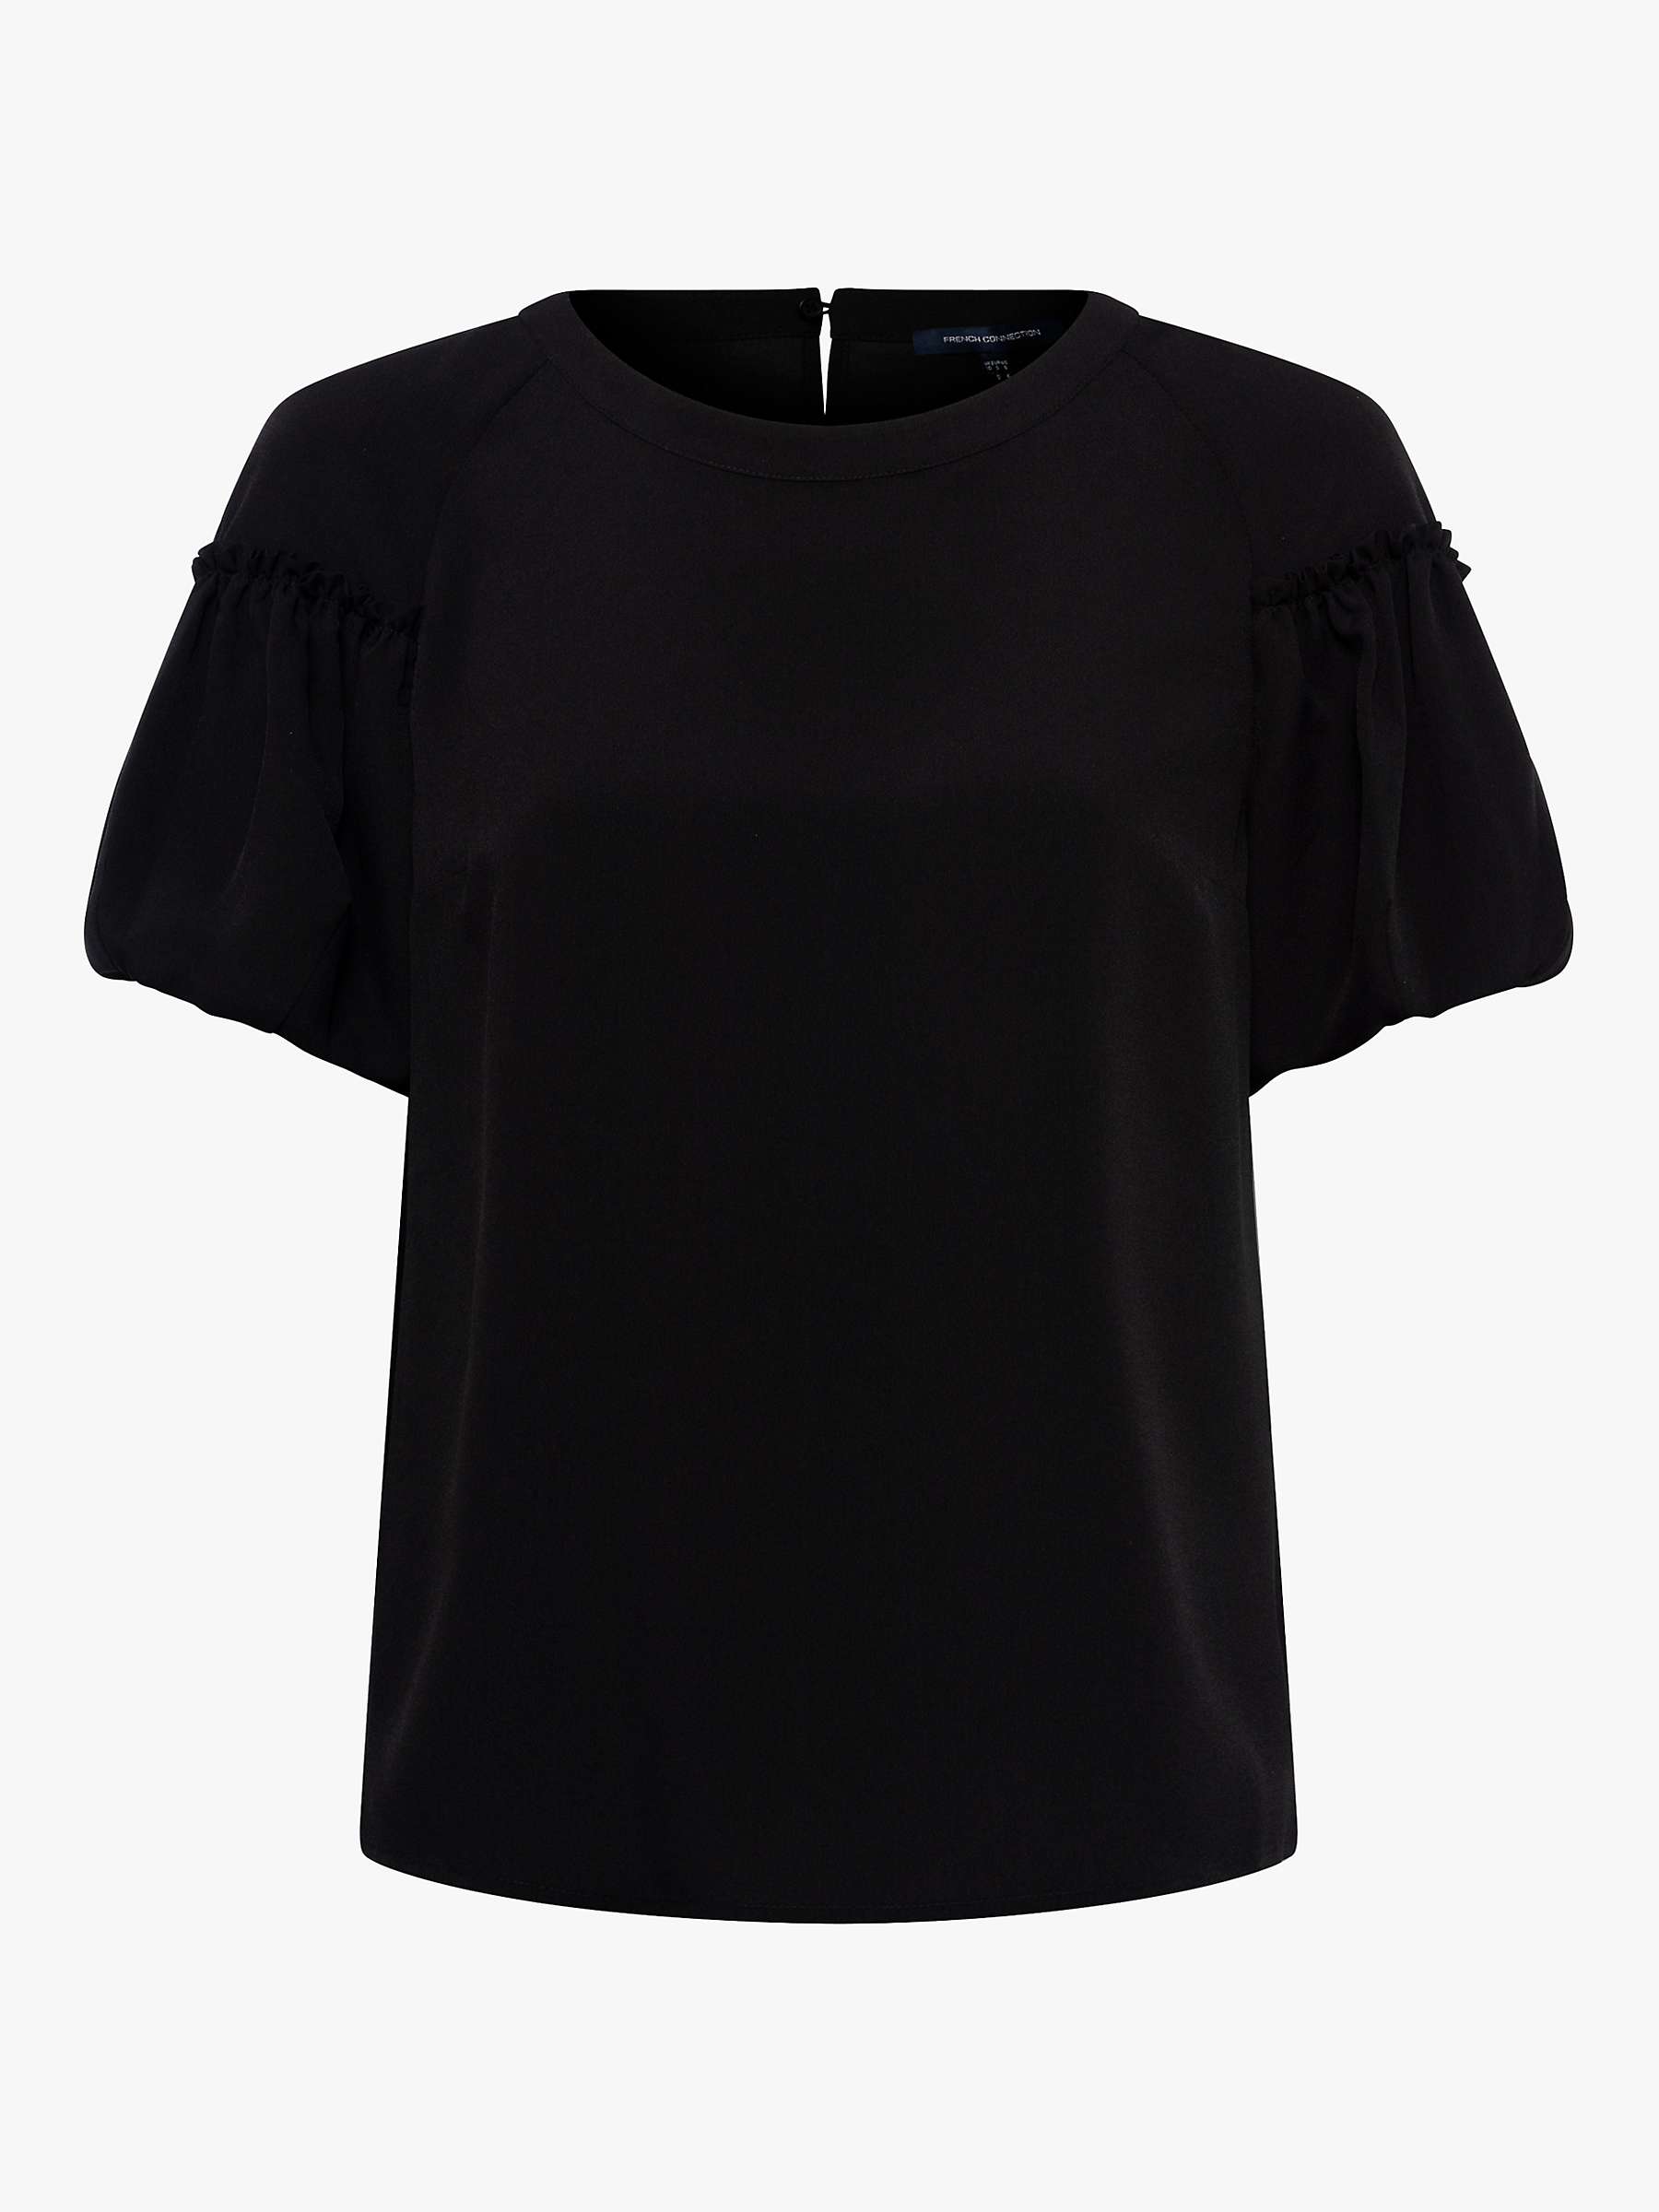 Buy French Connection Light Crepe Top, Black Online at johnlewis.com